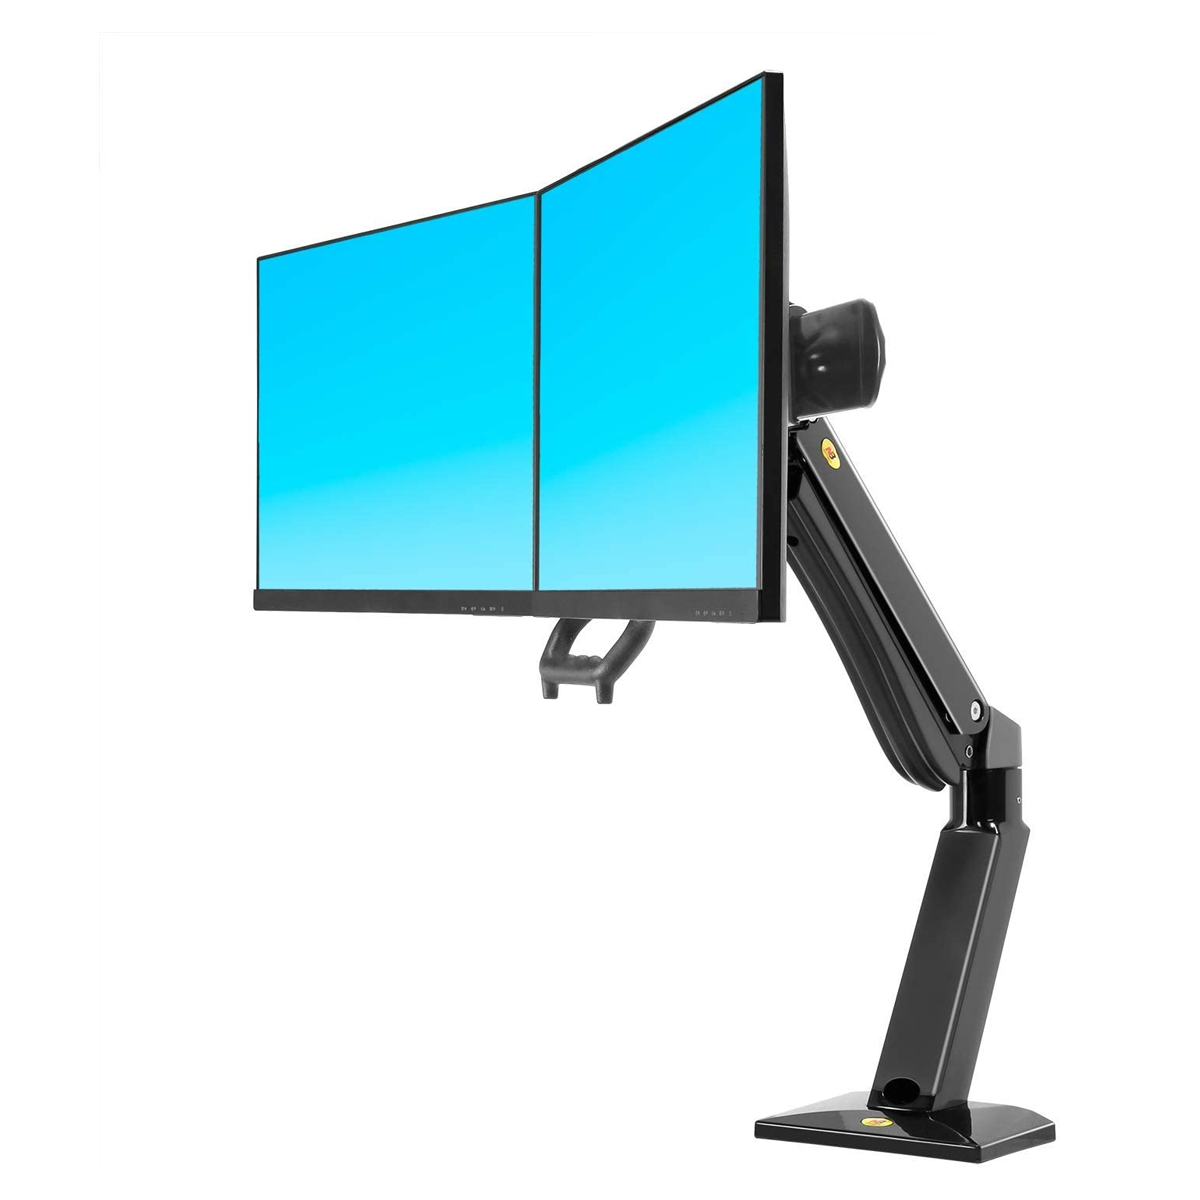 Dual Desk Monitor Mount Fits 24"-32" Double Screens with Load 4.4 to 33lbs (Black) (22-32", Dual Monitor)